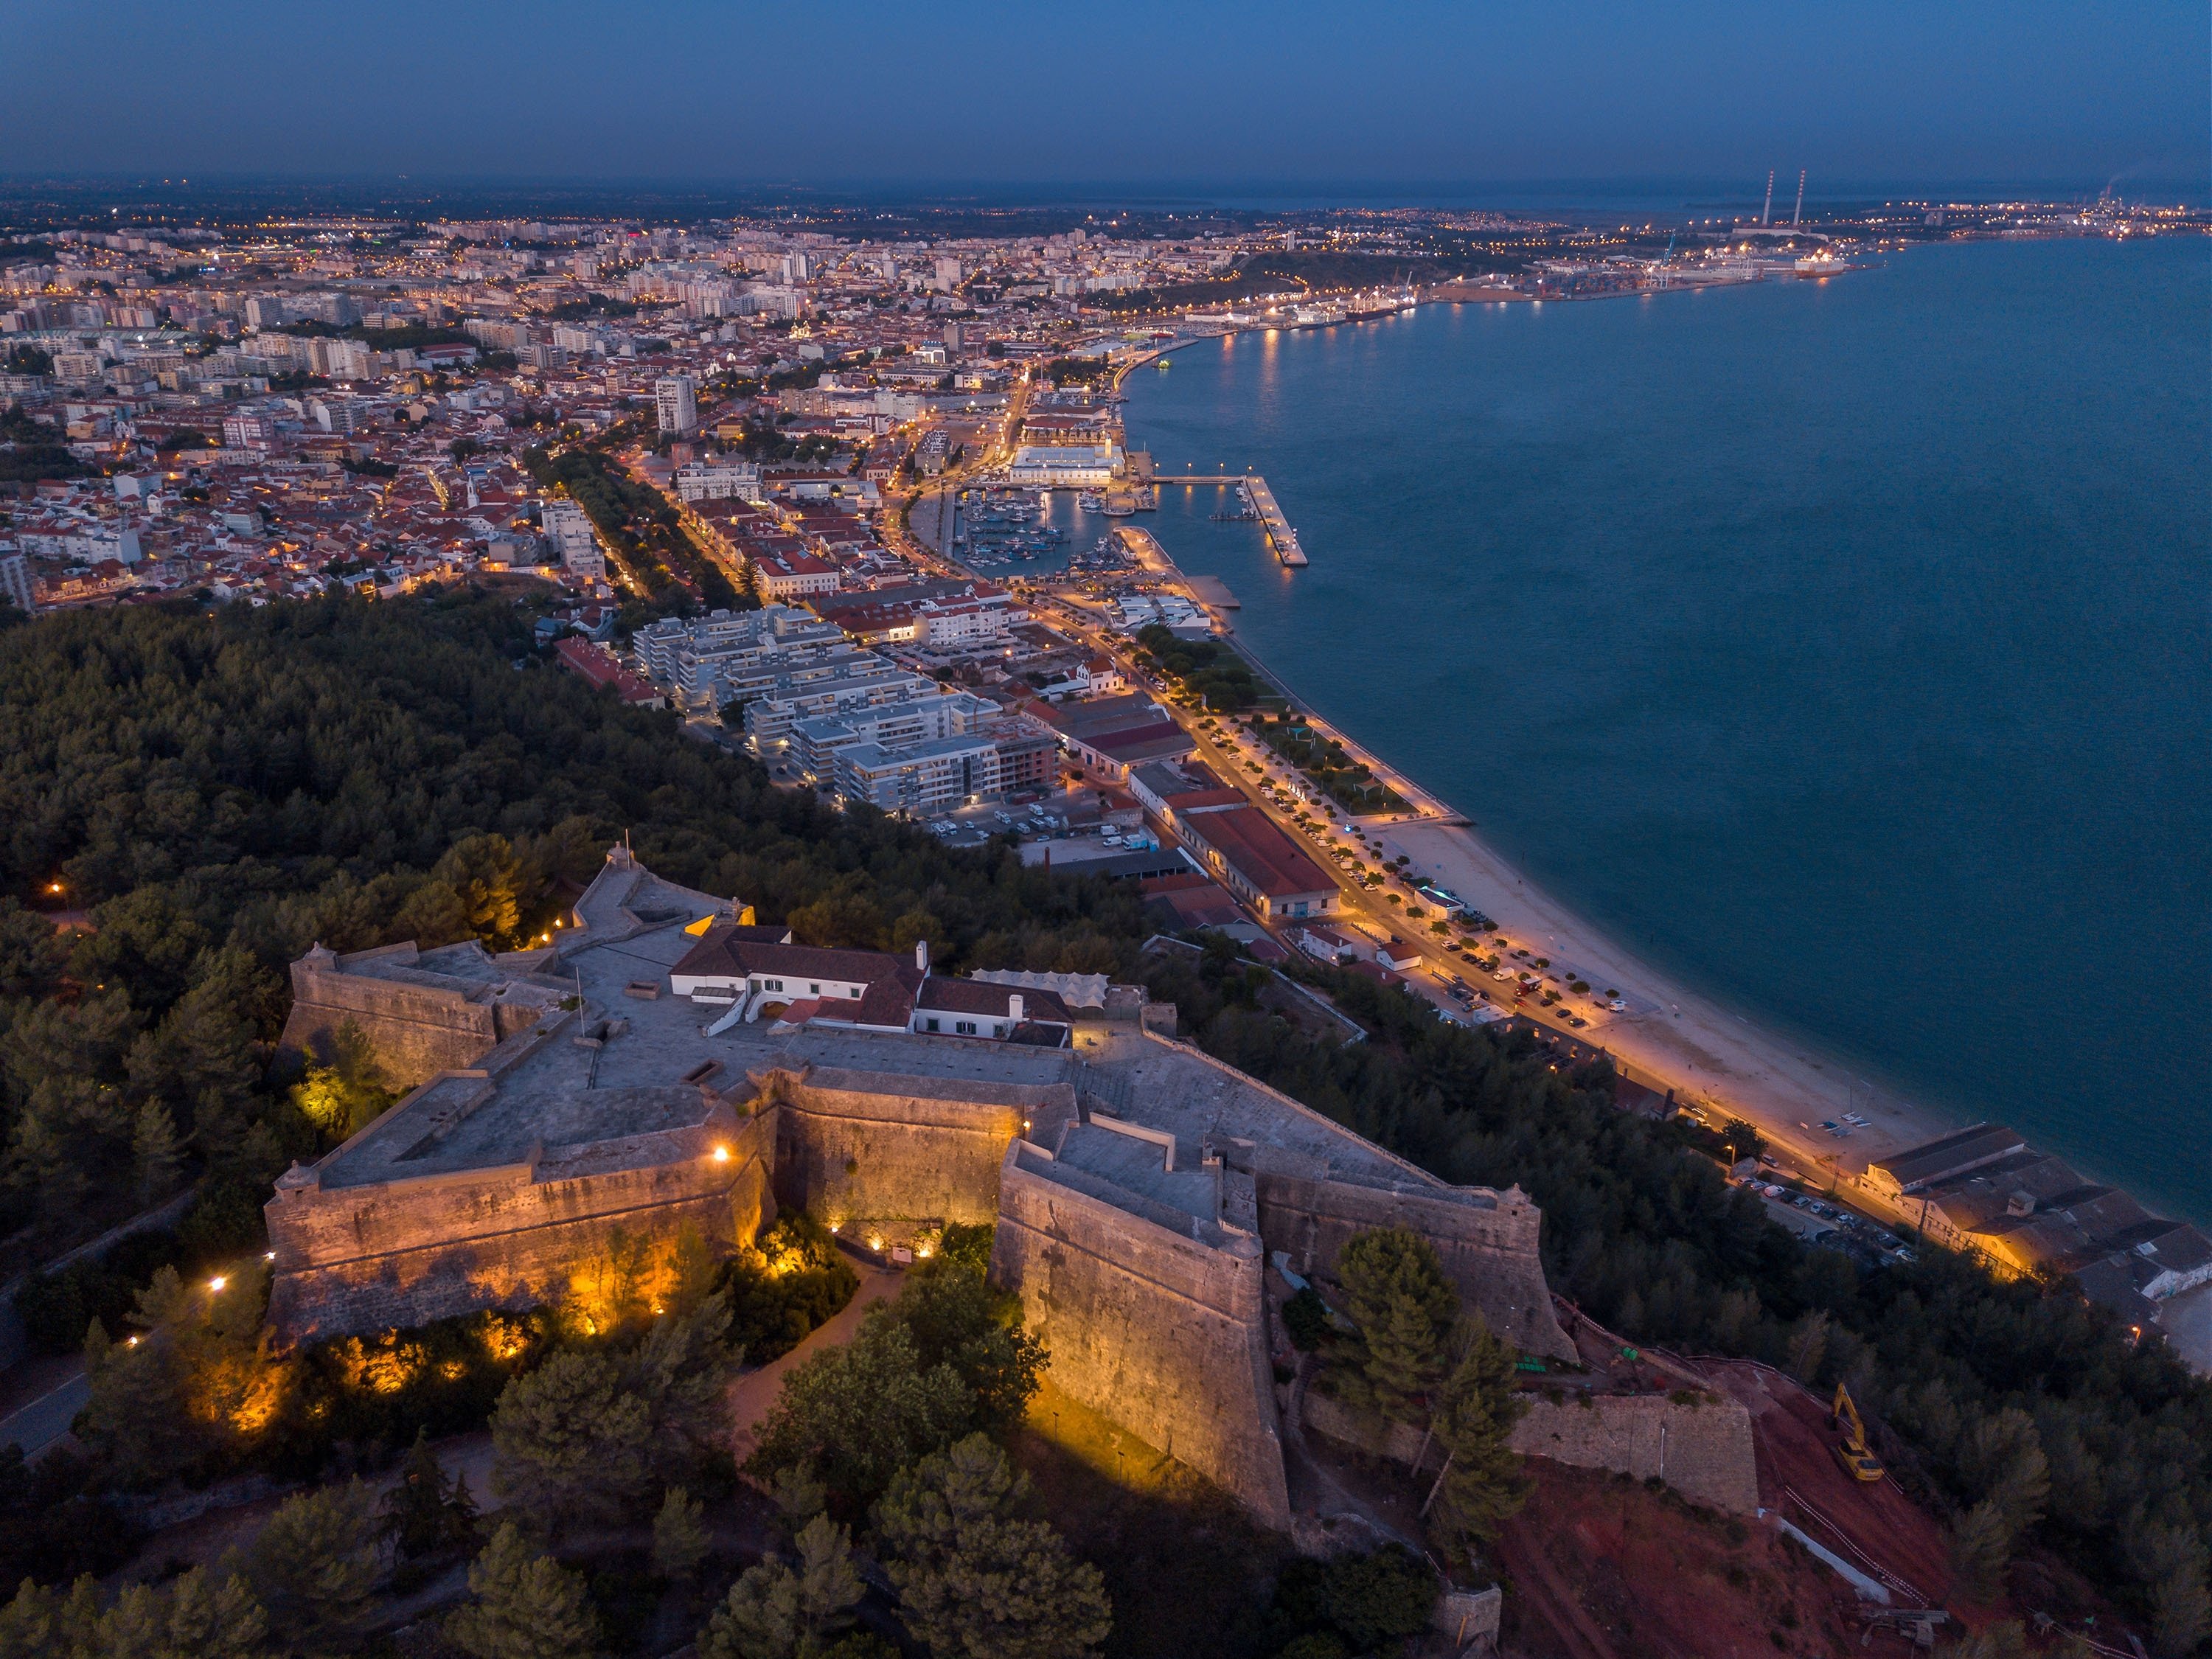 An aerial nighttime view shows lights brighten the city of Setubal, Portugal. (Shutterstock Photo)